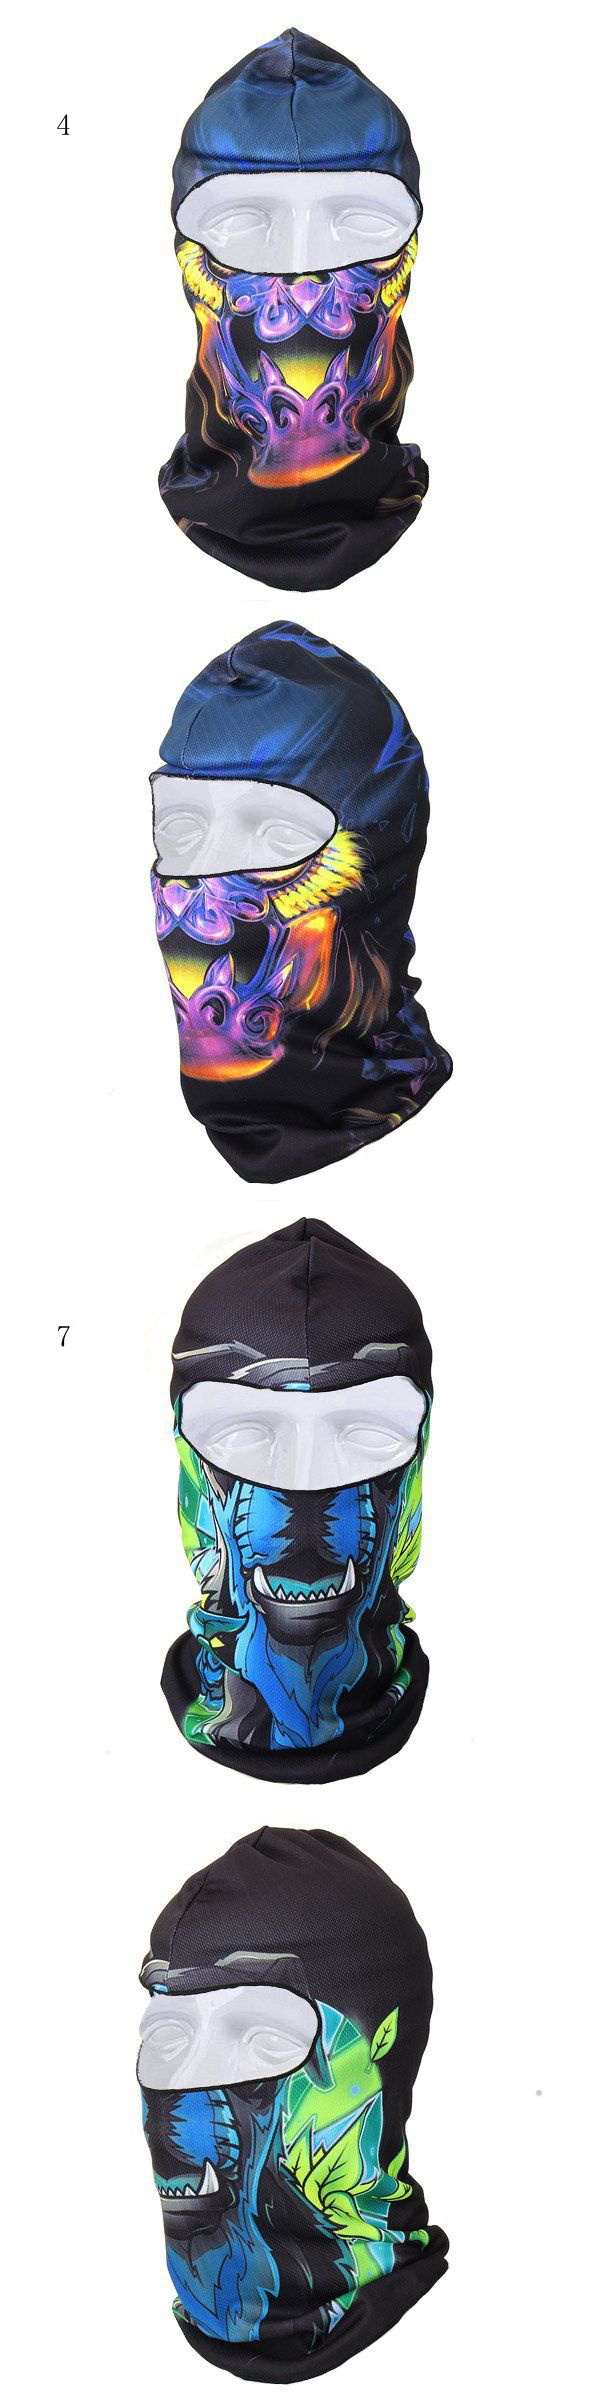 Men-Women-Winter-Neck-Face-Mask-Printed-Skiing-Hat-Cycling-Caps-1021402-4